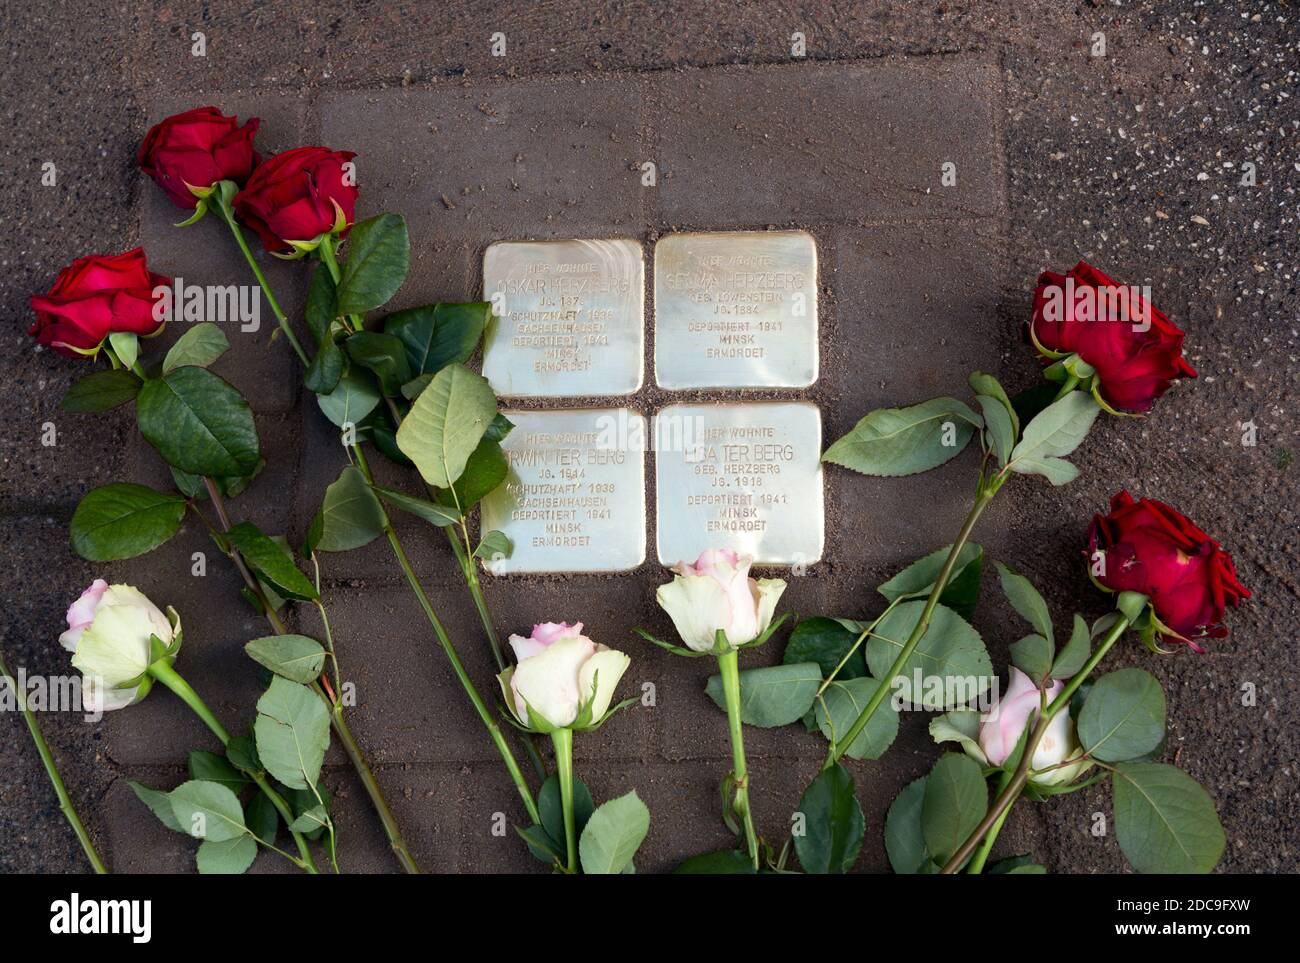 13.10.2020, Bremen, Bremen, Germany - Newly laid Stumbling Stone for Jewish deportees of the Nazi era. Stumbling Stones give names to deportees at the Stock Photo